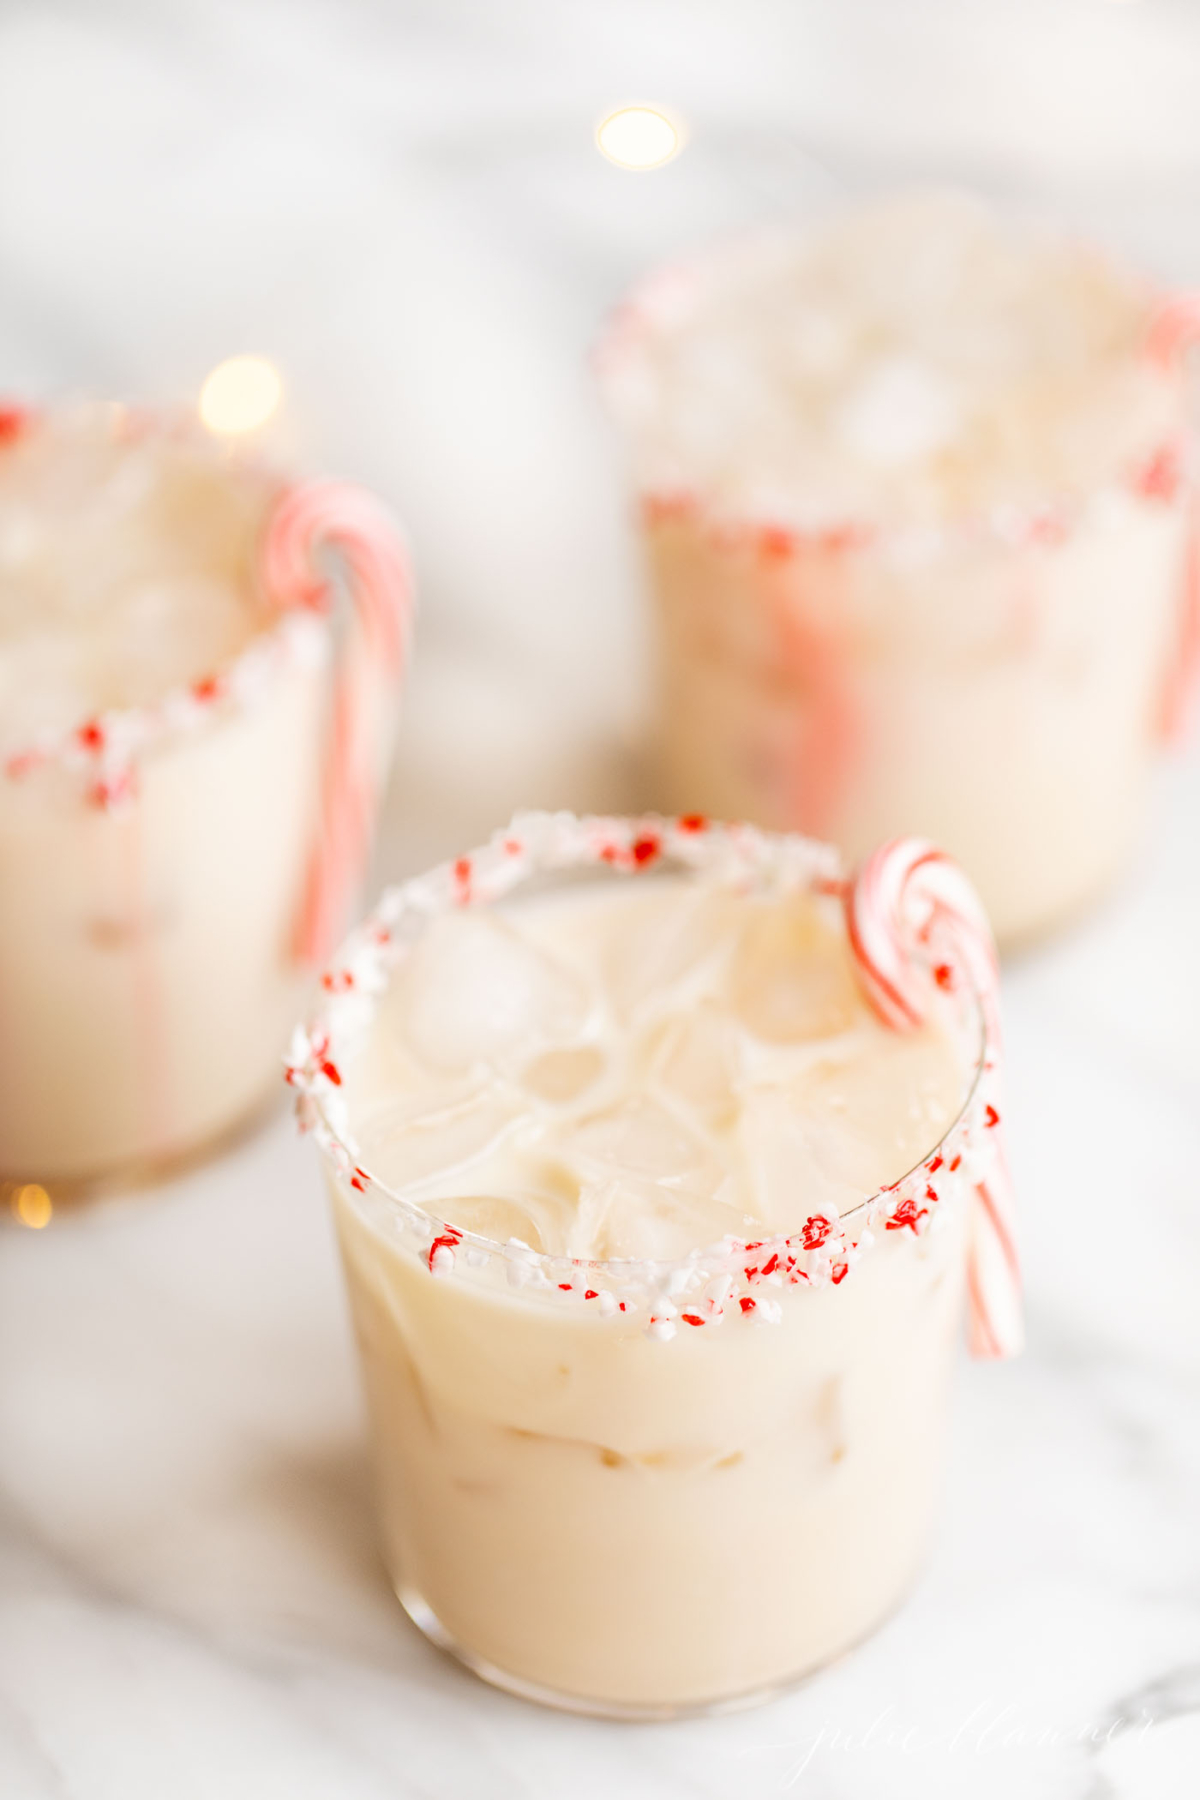 Three iced drinks with candy canes and peppermint extract on top.